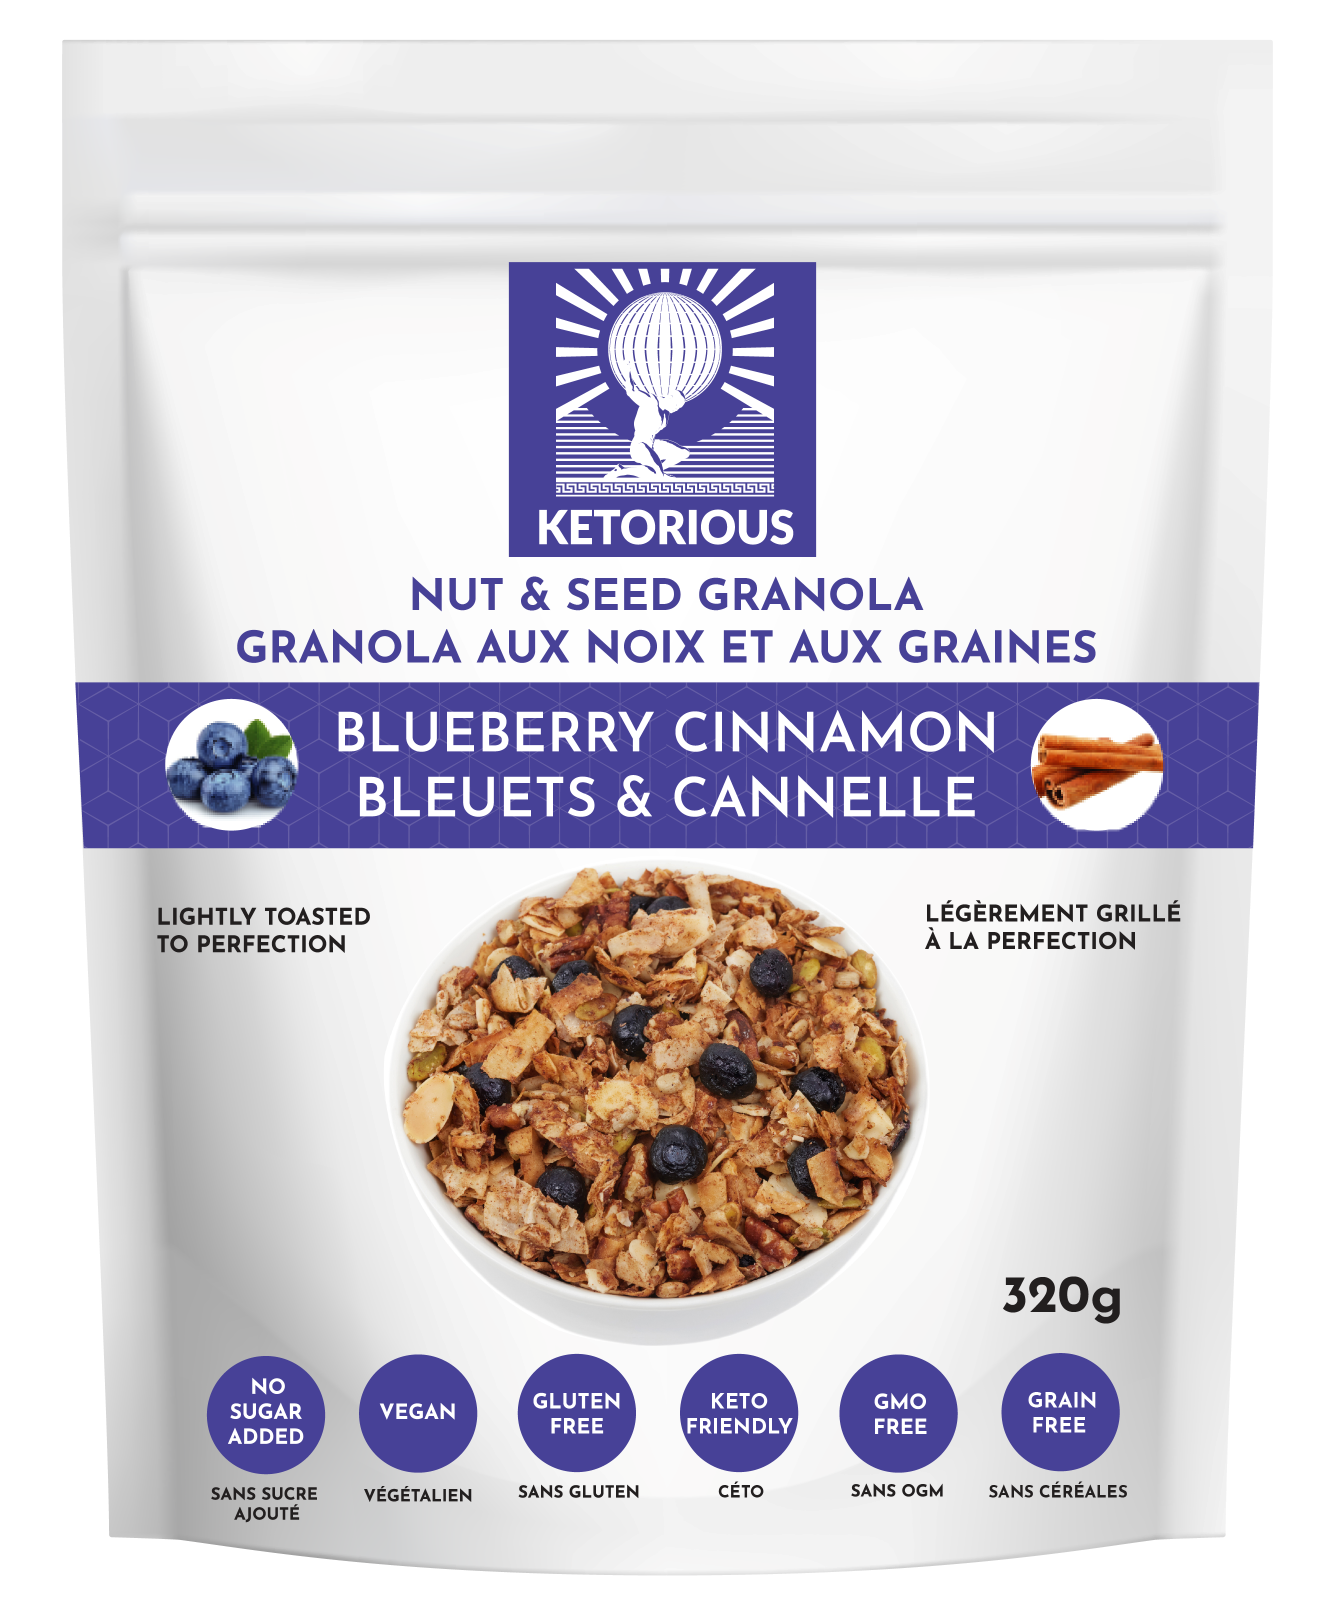 Blueberry & Cinnamon Nut and Seed Granola by Ketorious, 320g